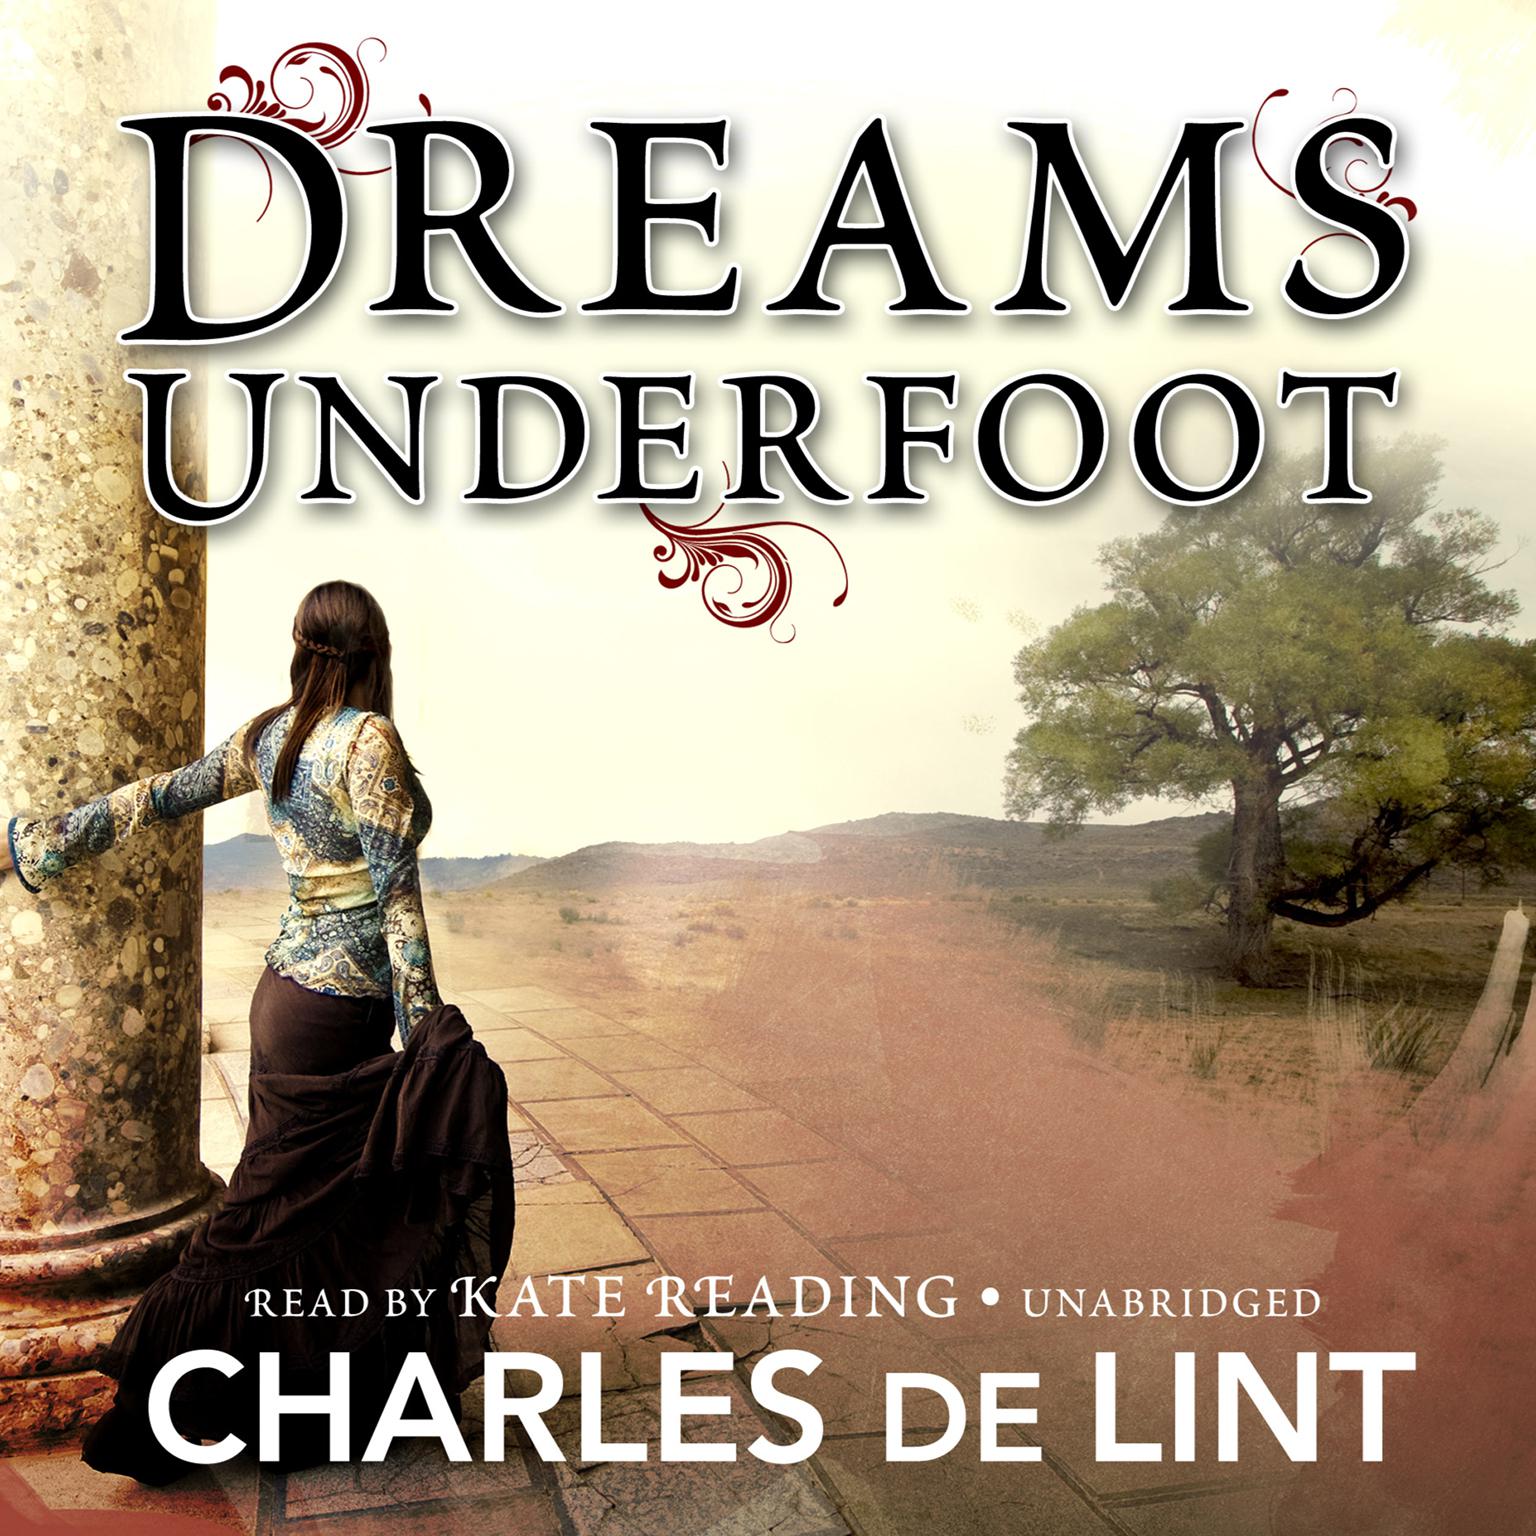 Dreams Underfoot: The Newford Collection Audiobook, by Charles de Lint